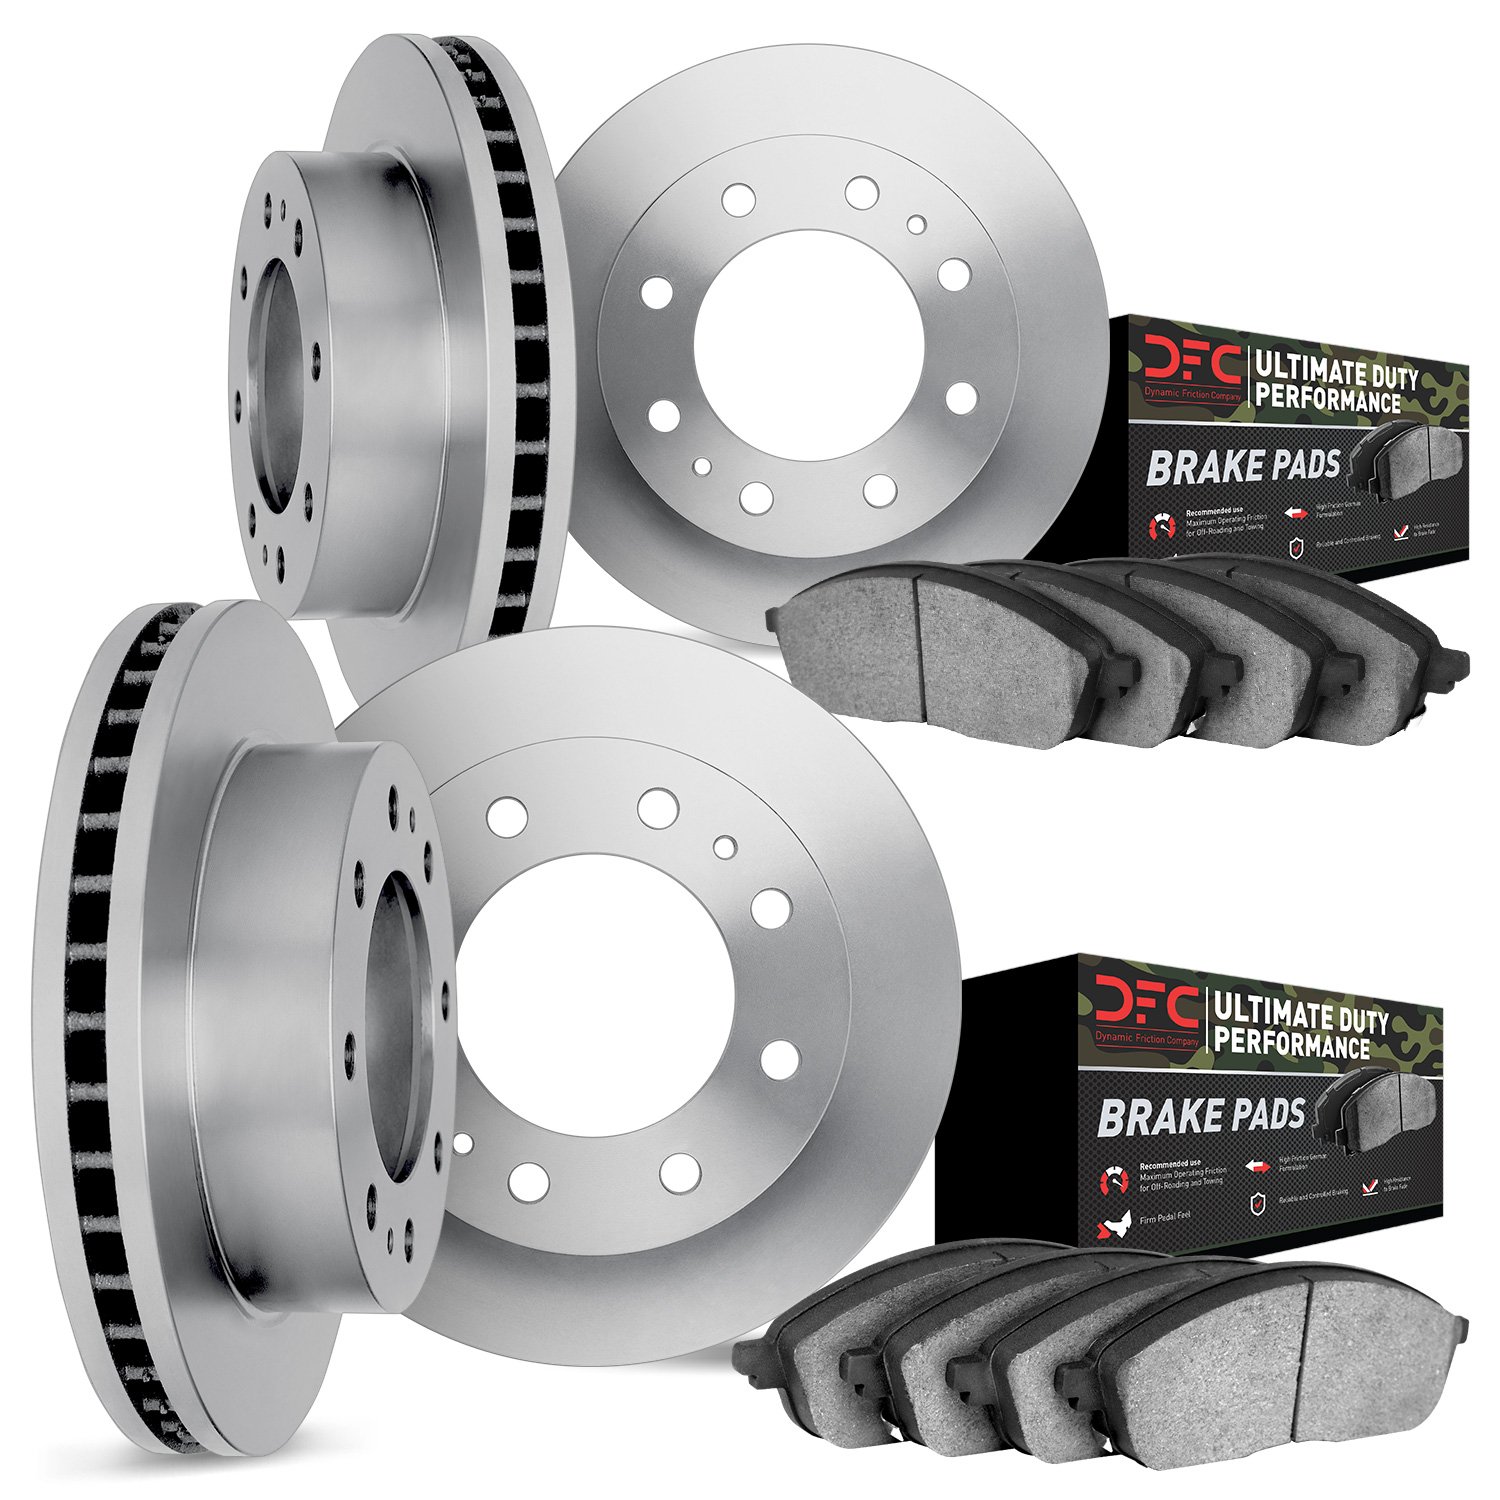 6404-54162 Brake Rotors with Ultimate-Duty Brake Pads, Fits Select Ford/Lincoln/Mercury/Mazda, Position: Front and Rear